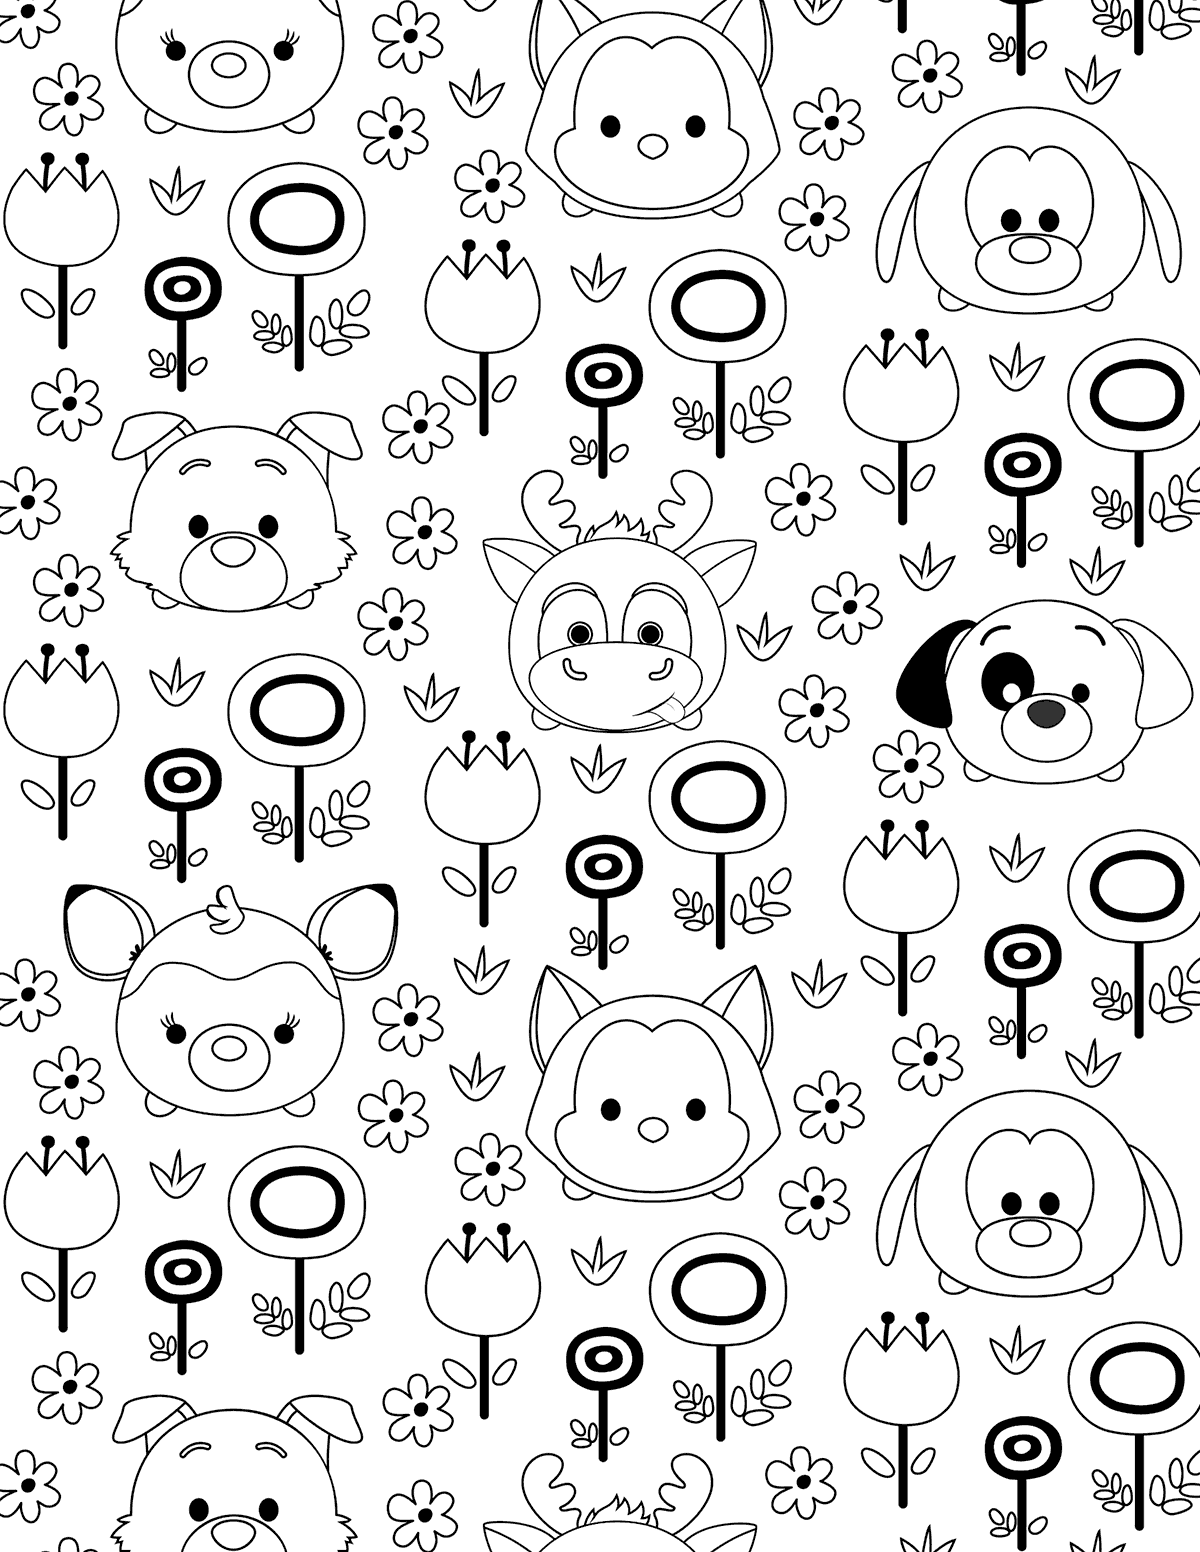 Tsum Tsum Characters and Patterns Coloring Pages